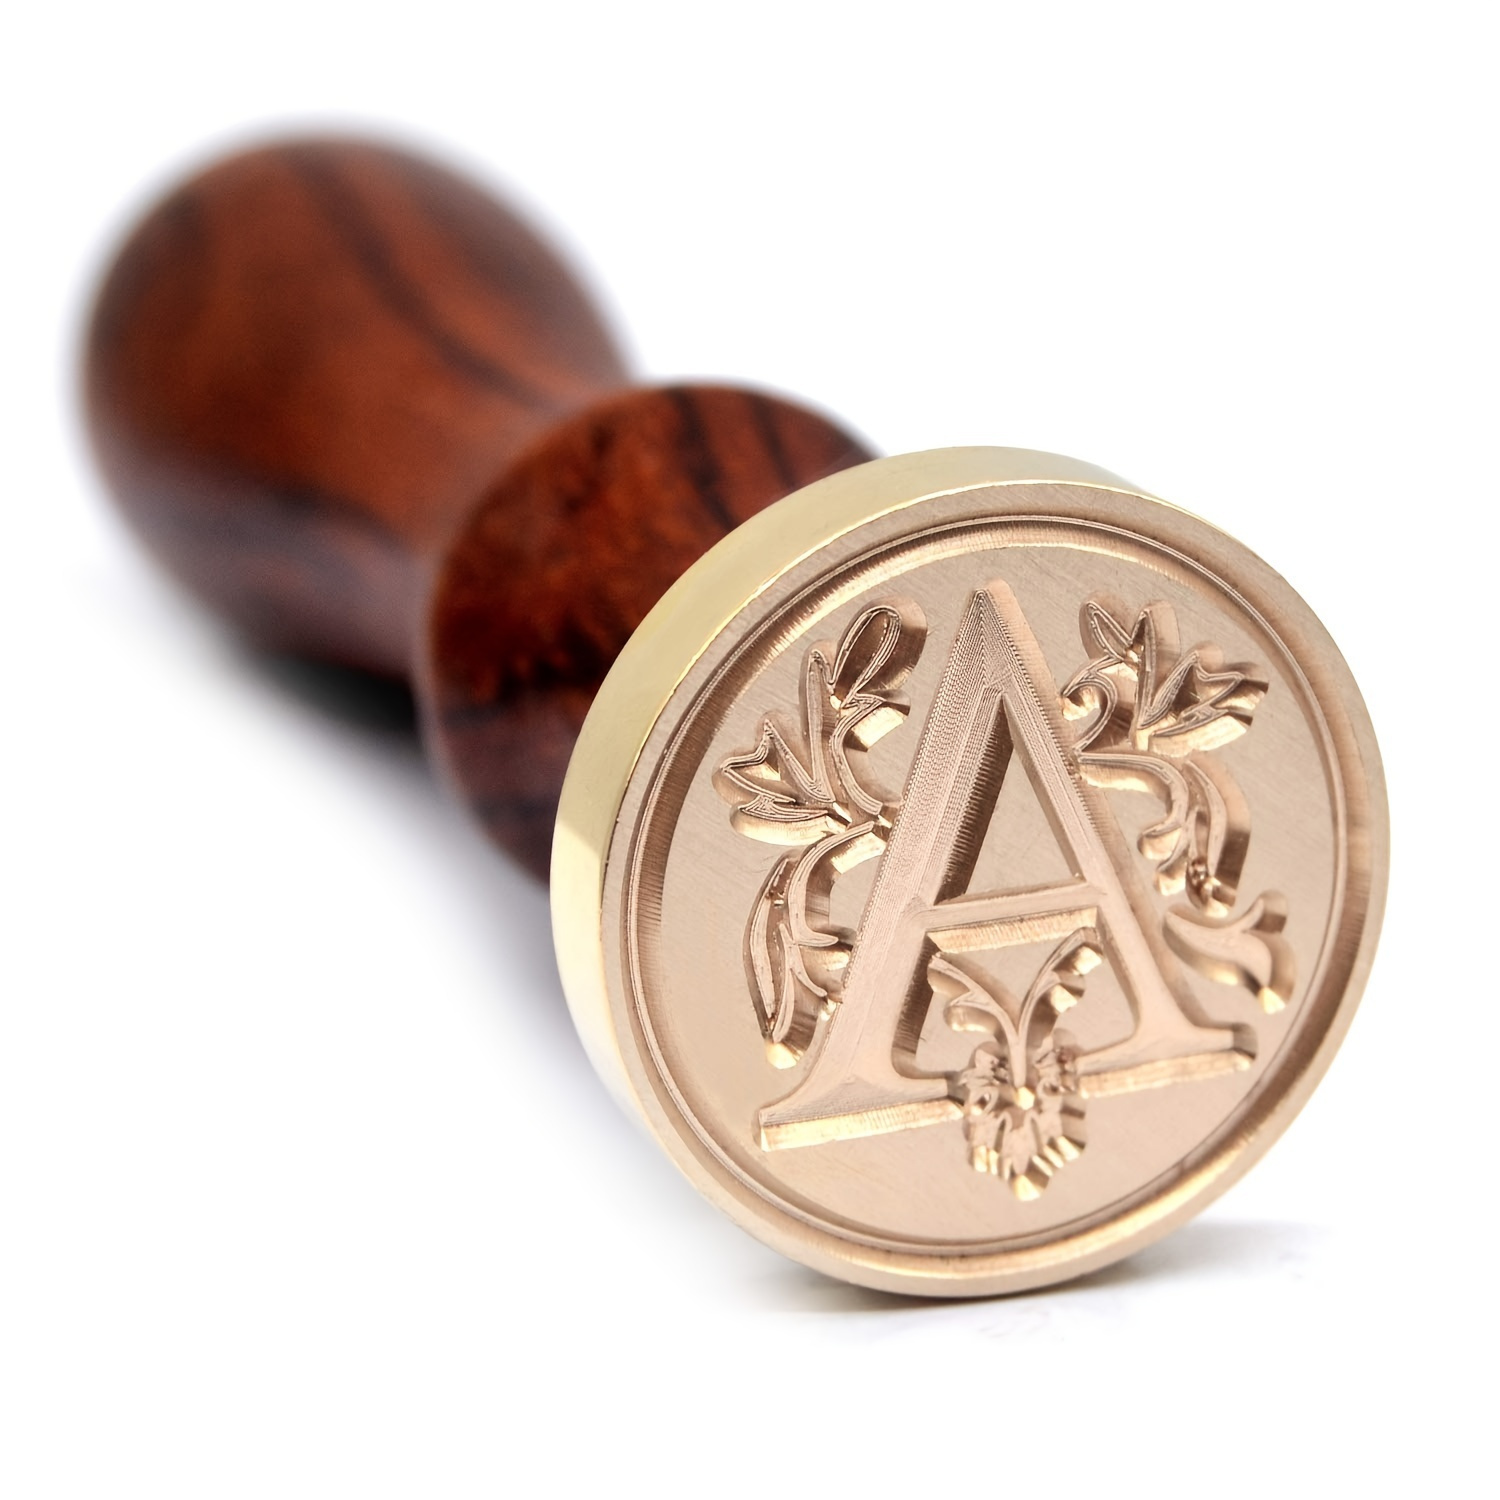 

1pc Letter A-m Wax Seal Stamp Vintage Retro